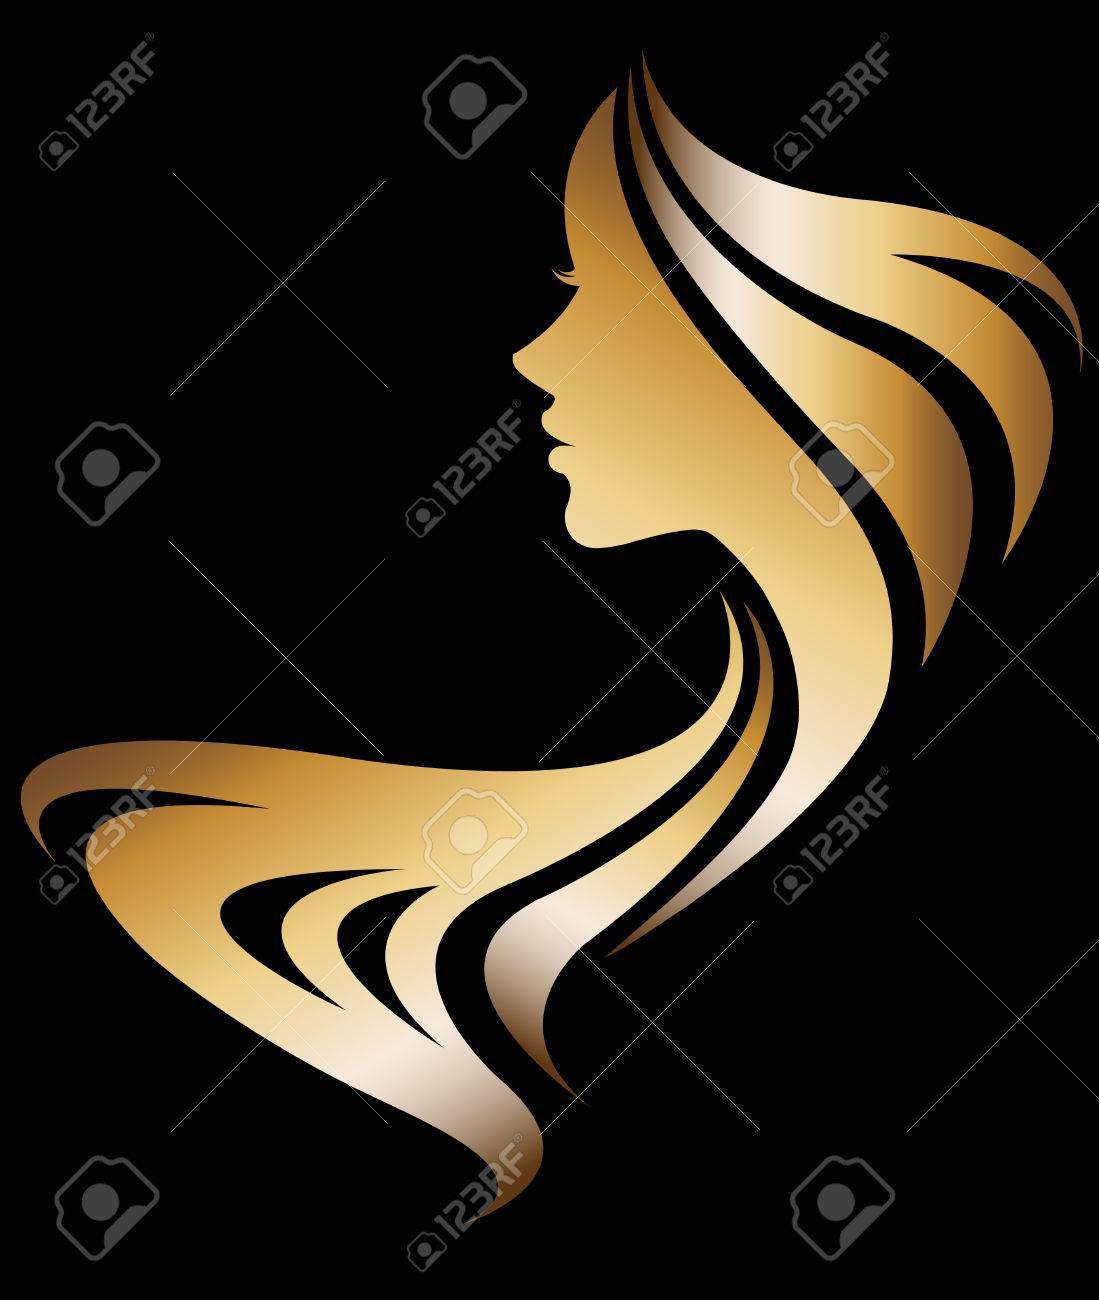 illustration vector of women silhouette icon on black background